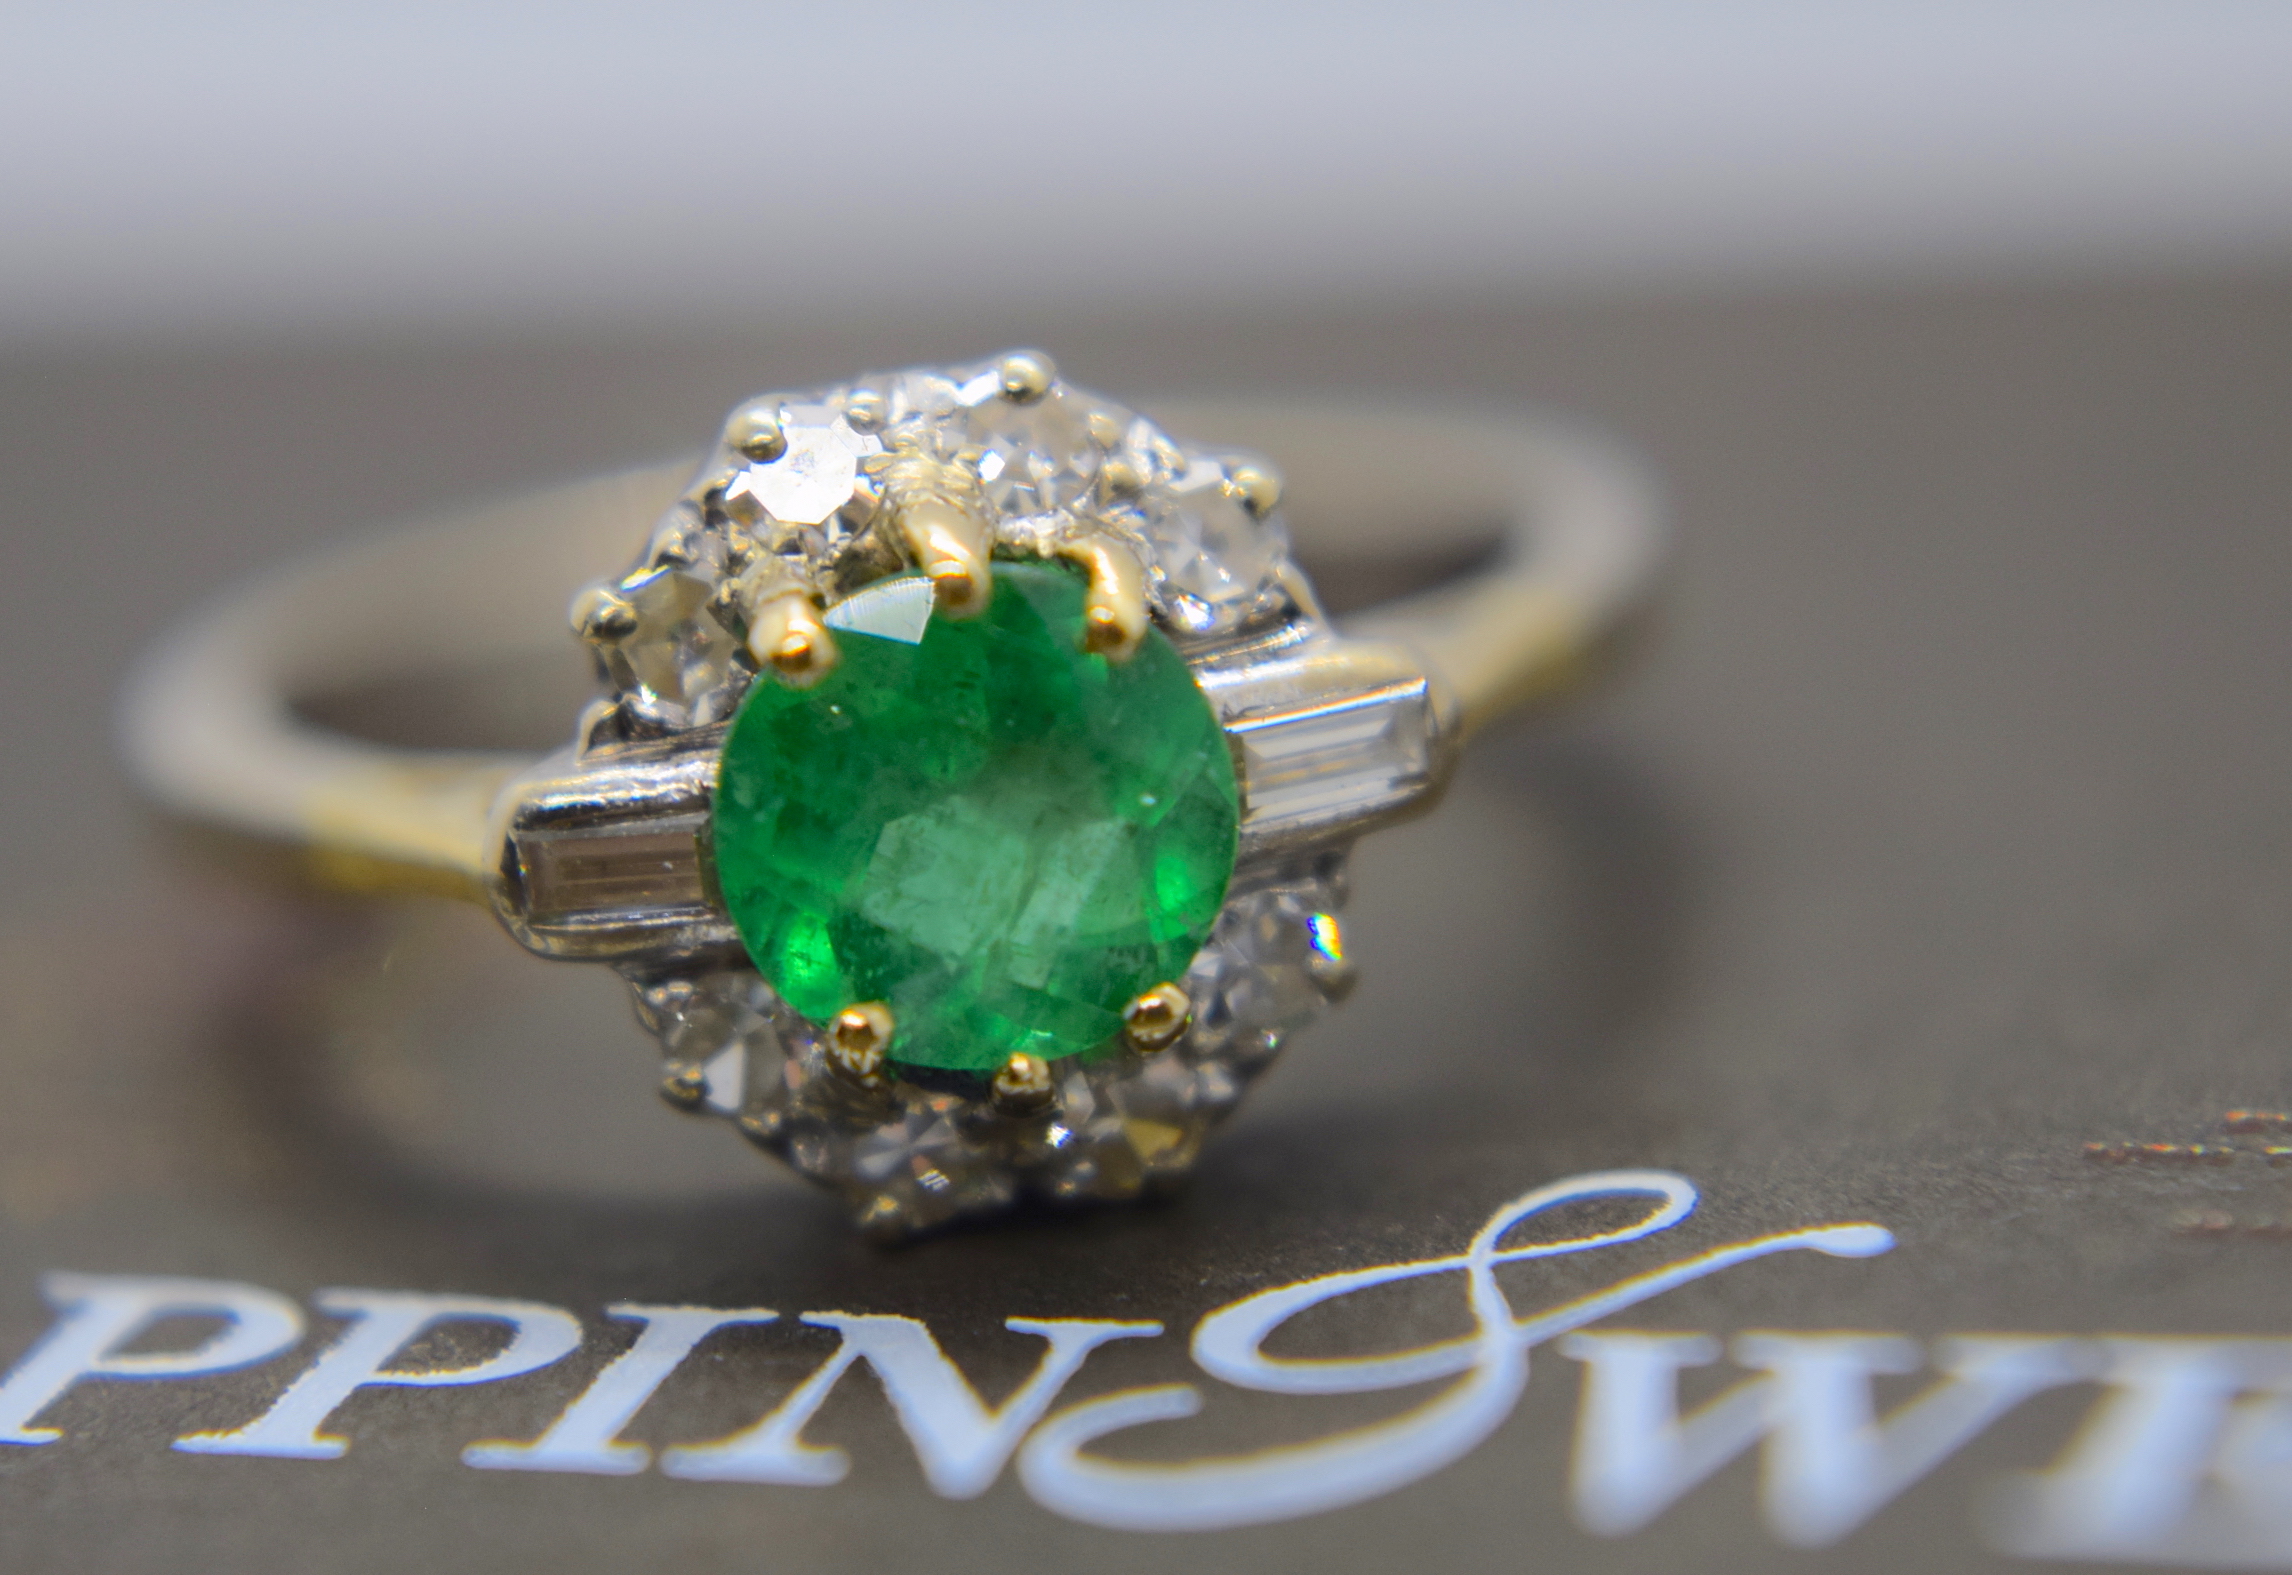 1.40CT EMERALD & BAGUETTE/ OLD CUT DIAMOND RING IN 18K YELLOW & WHITE GOLD (SIZE L 1/2 - APPROX. TCW